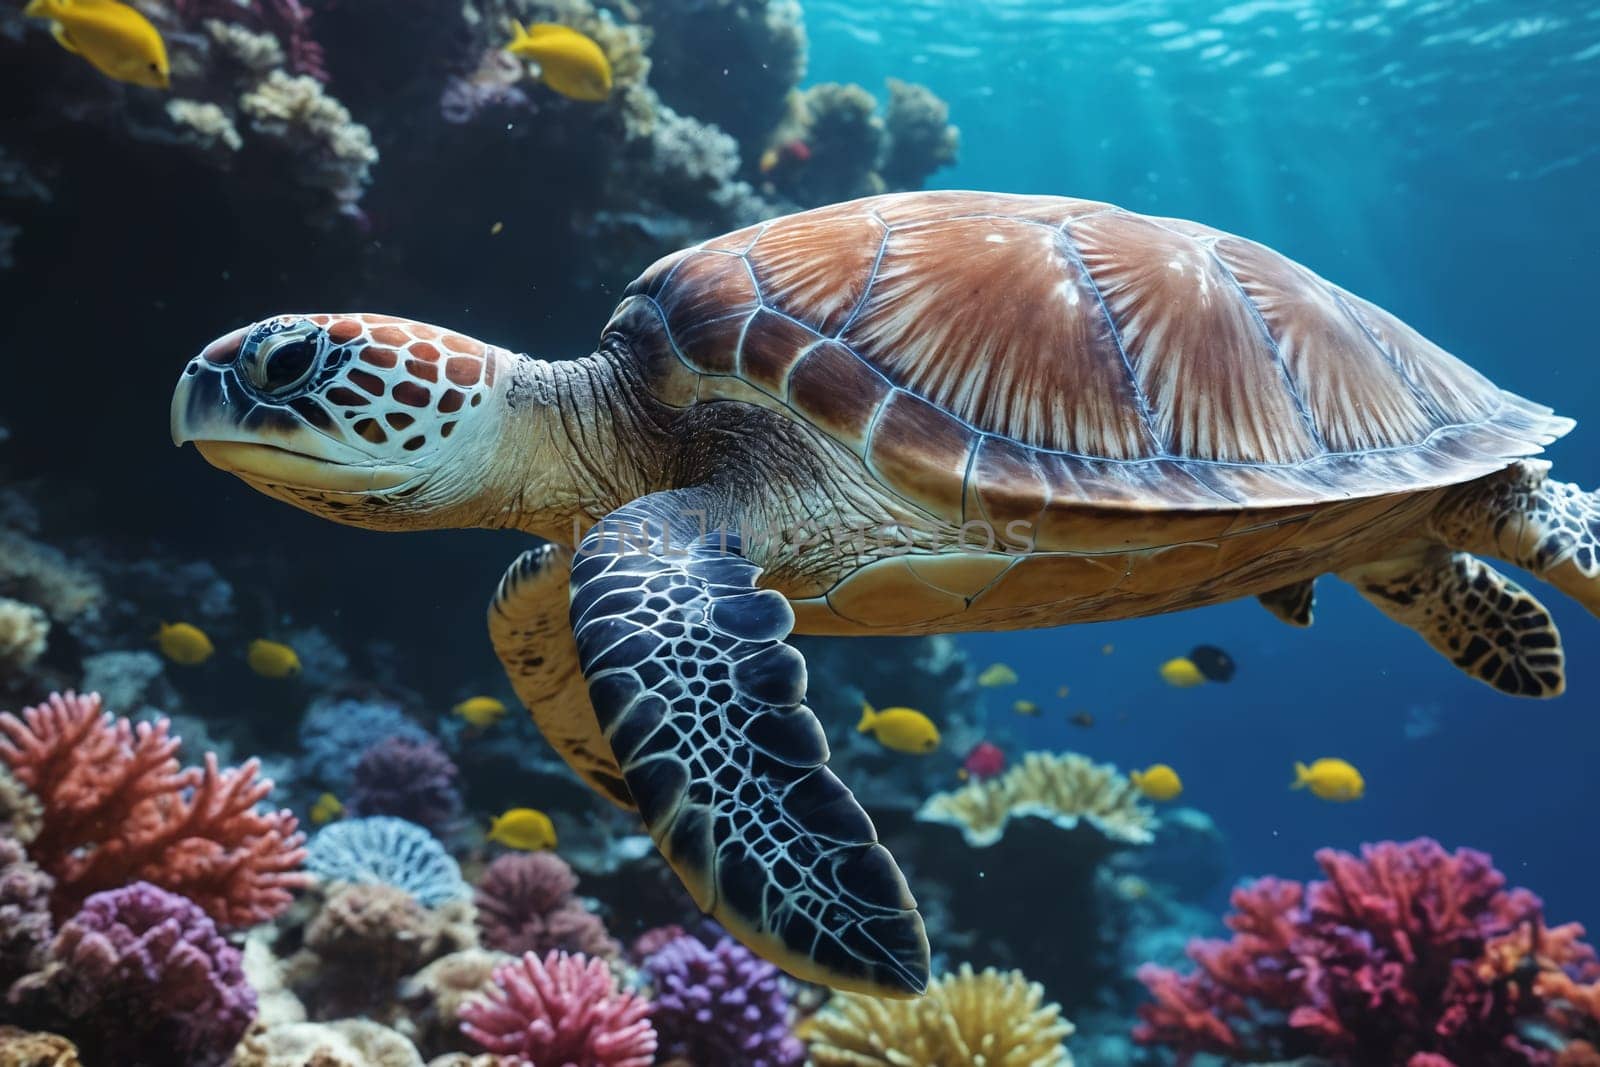 The Gentle Voyager: A Sea Turtle in Its Marine Home. by Andre1ns